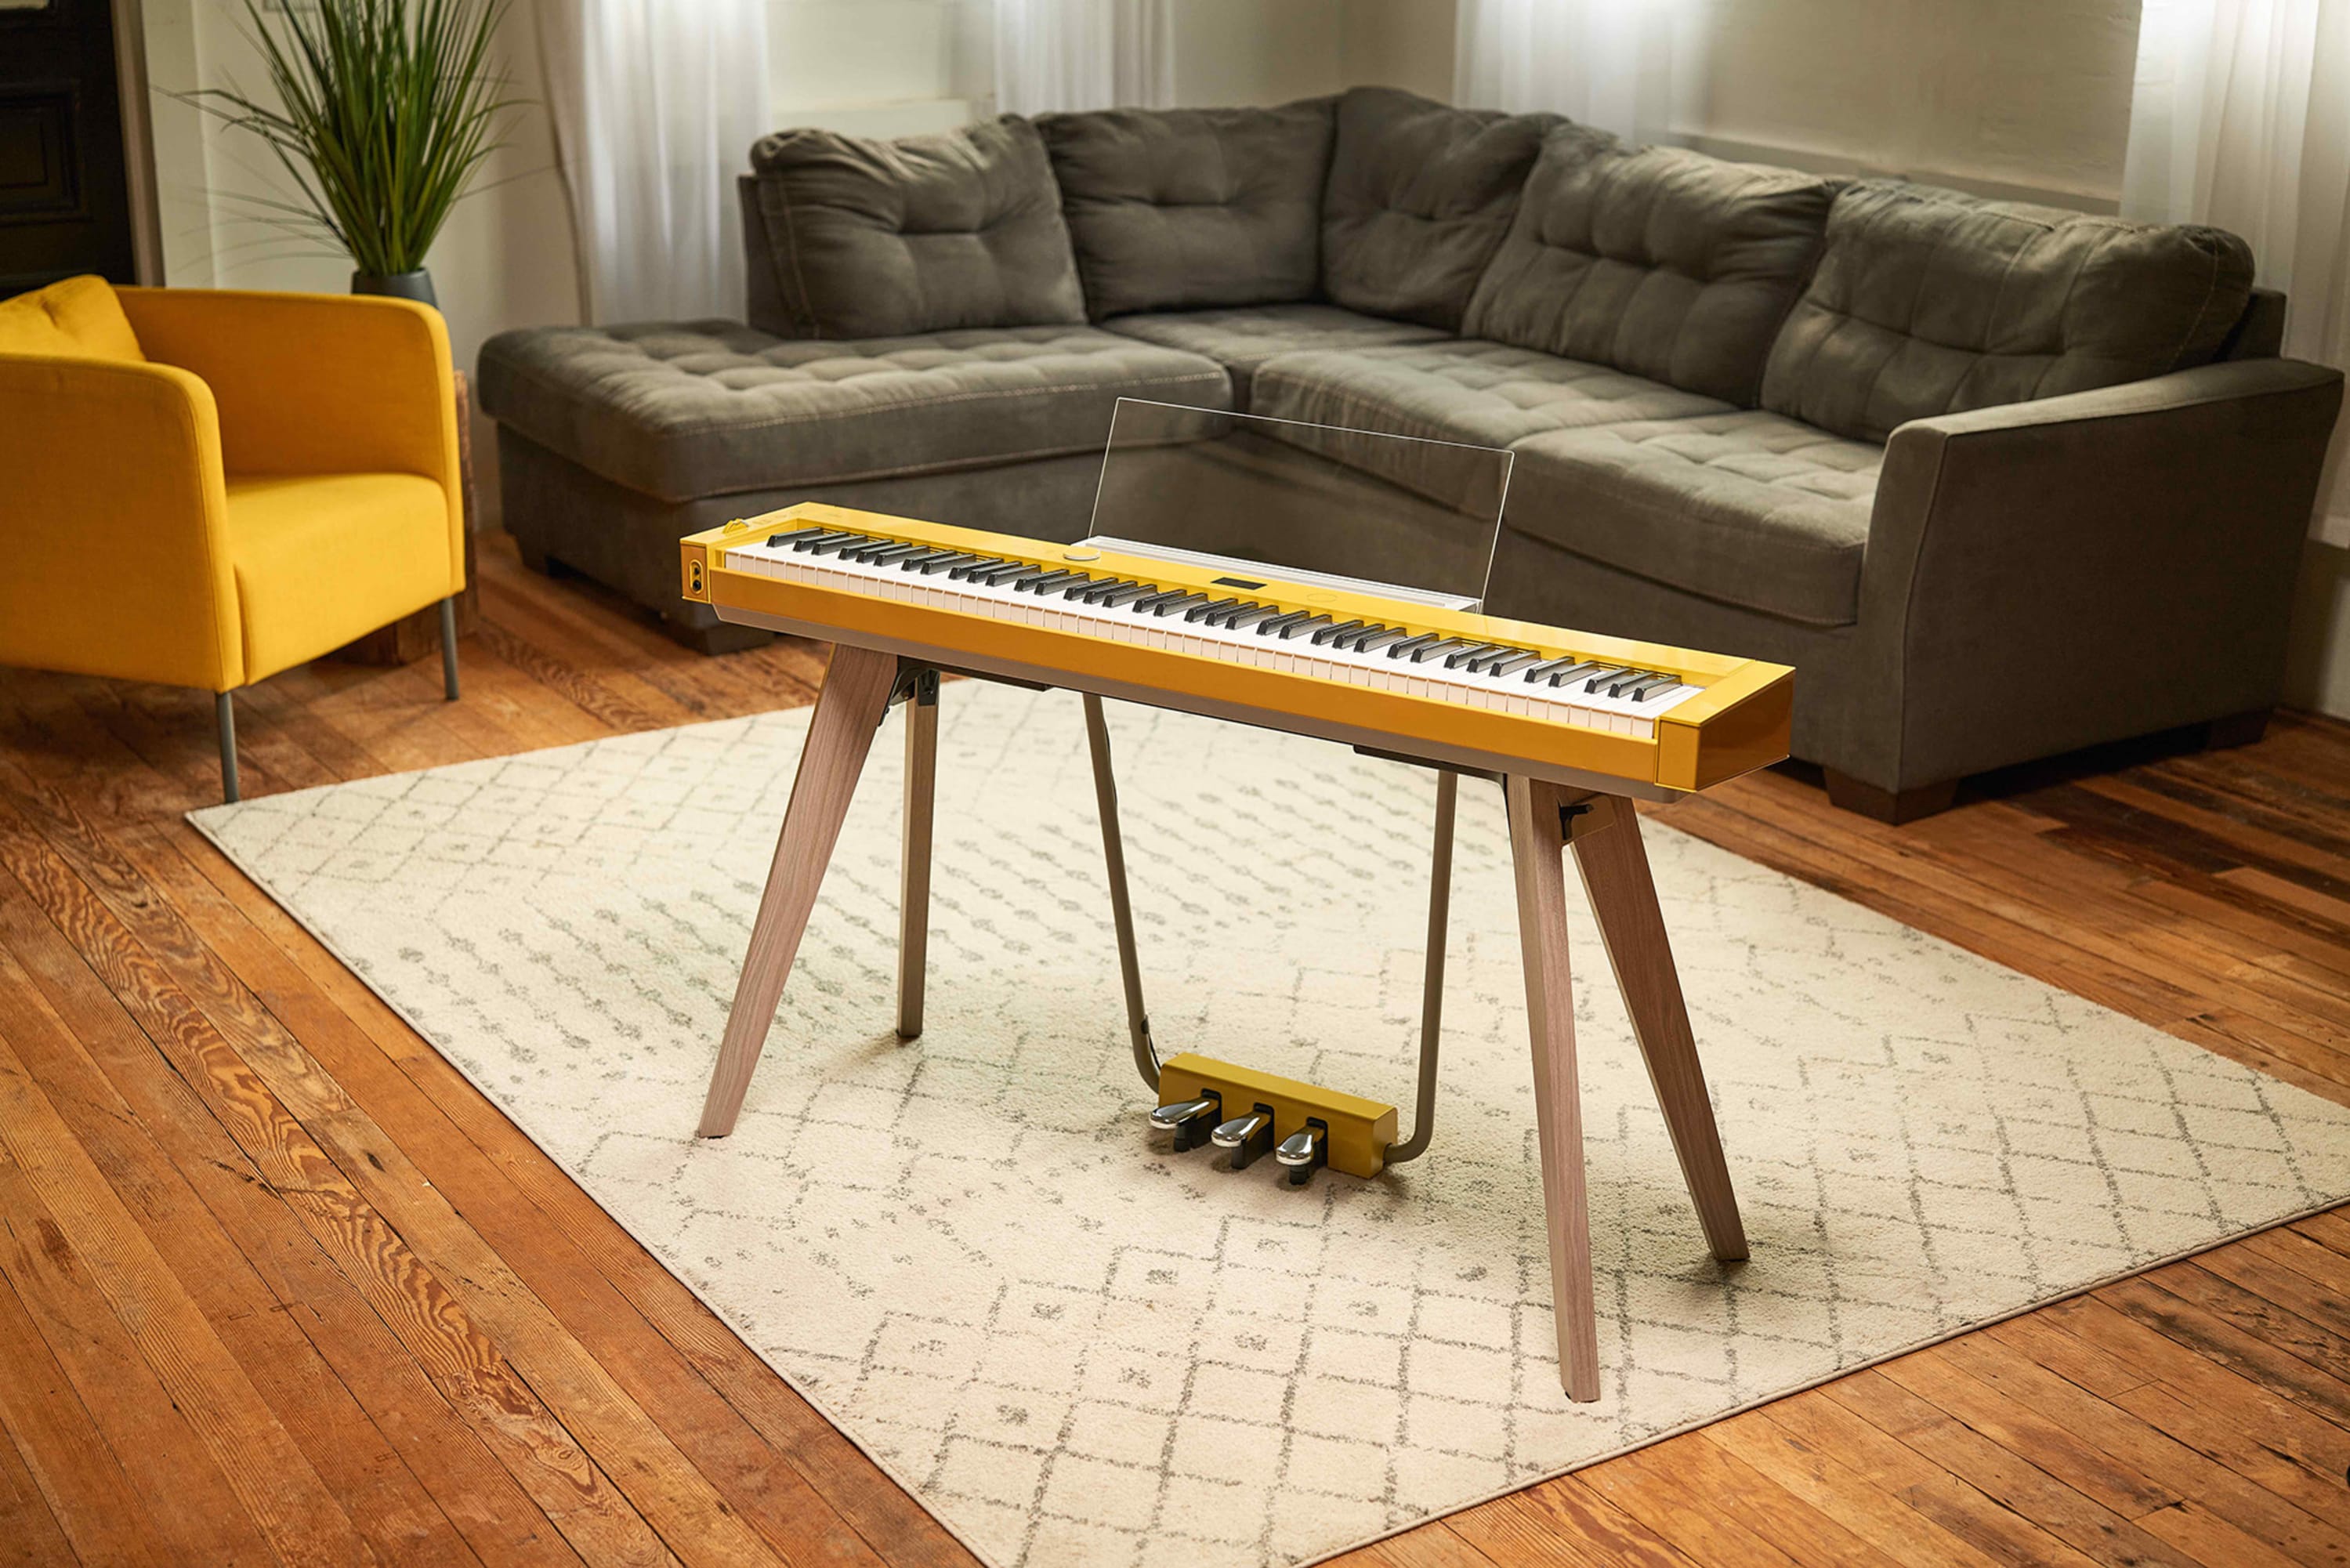 What we bought: Casio’s latest flagship digital piano doubles as drool-worthy furniture